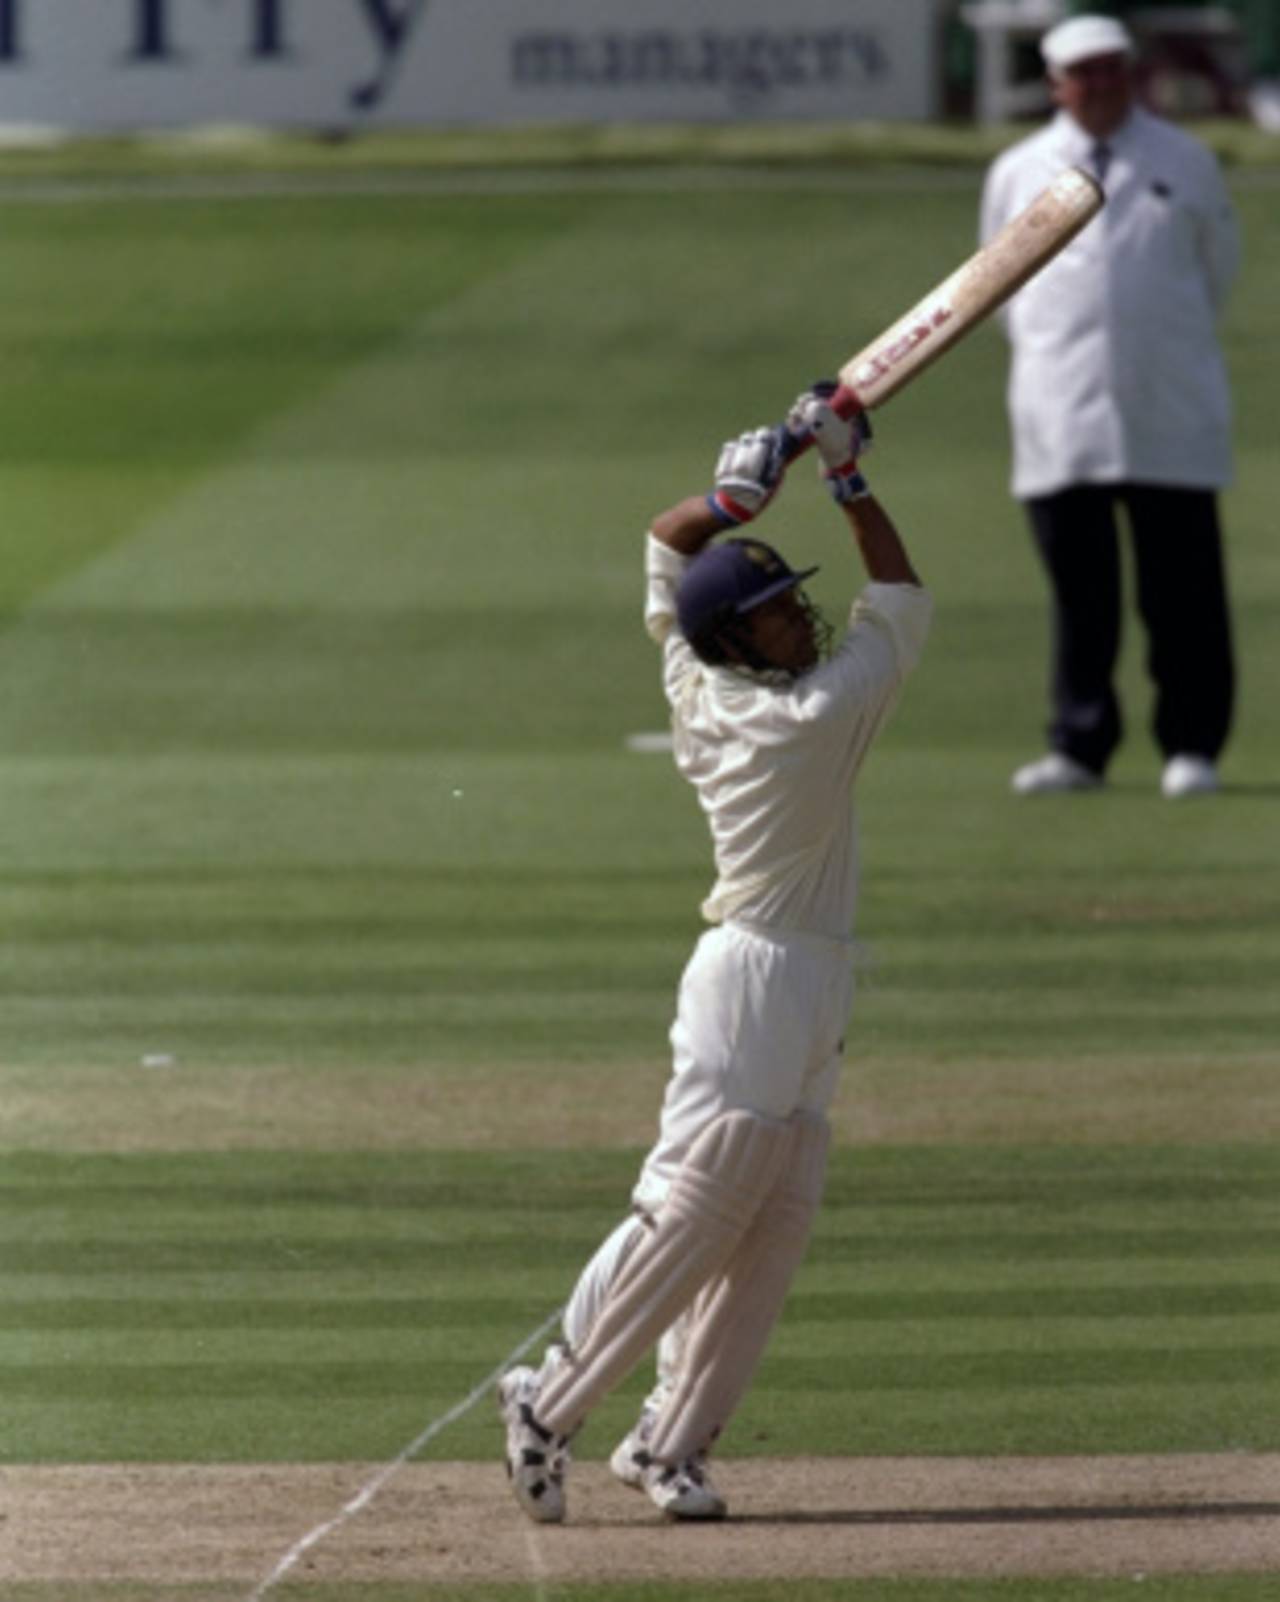 Sachin Tendulkar in action in the Princess of Wales Memorial match at Lord's in 1998&nbsp;&nbsp;&bull;&nbsp;&nbsp;Getty Images